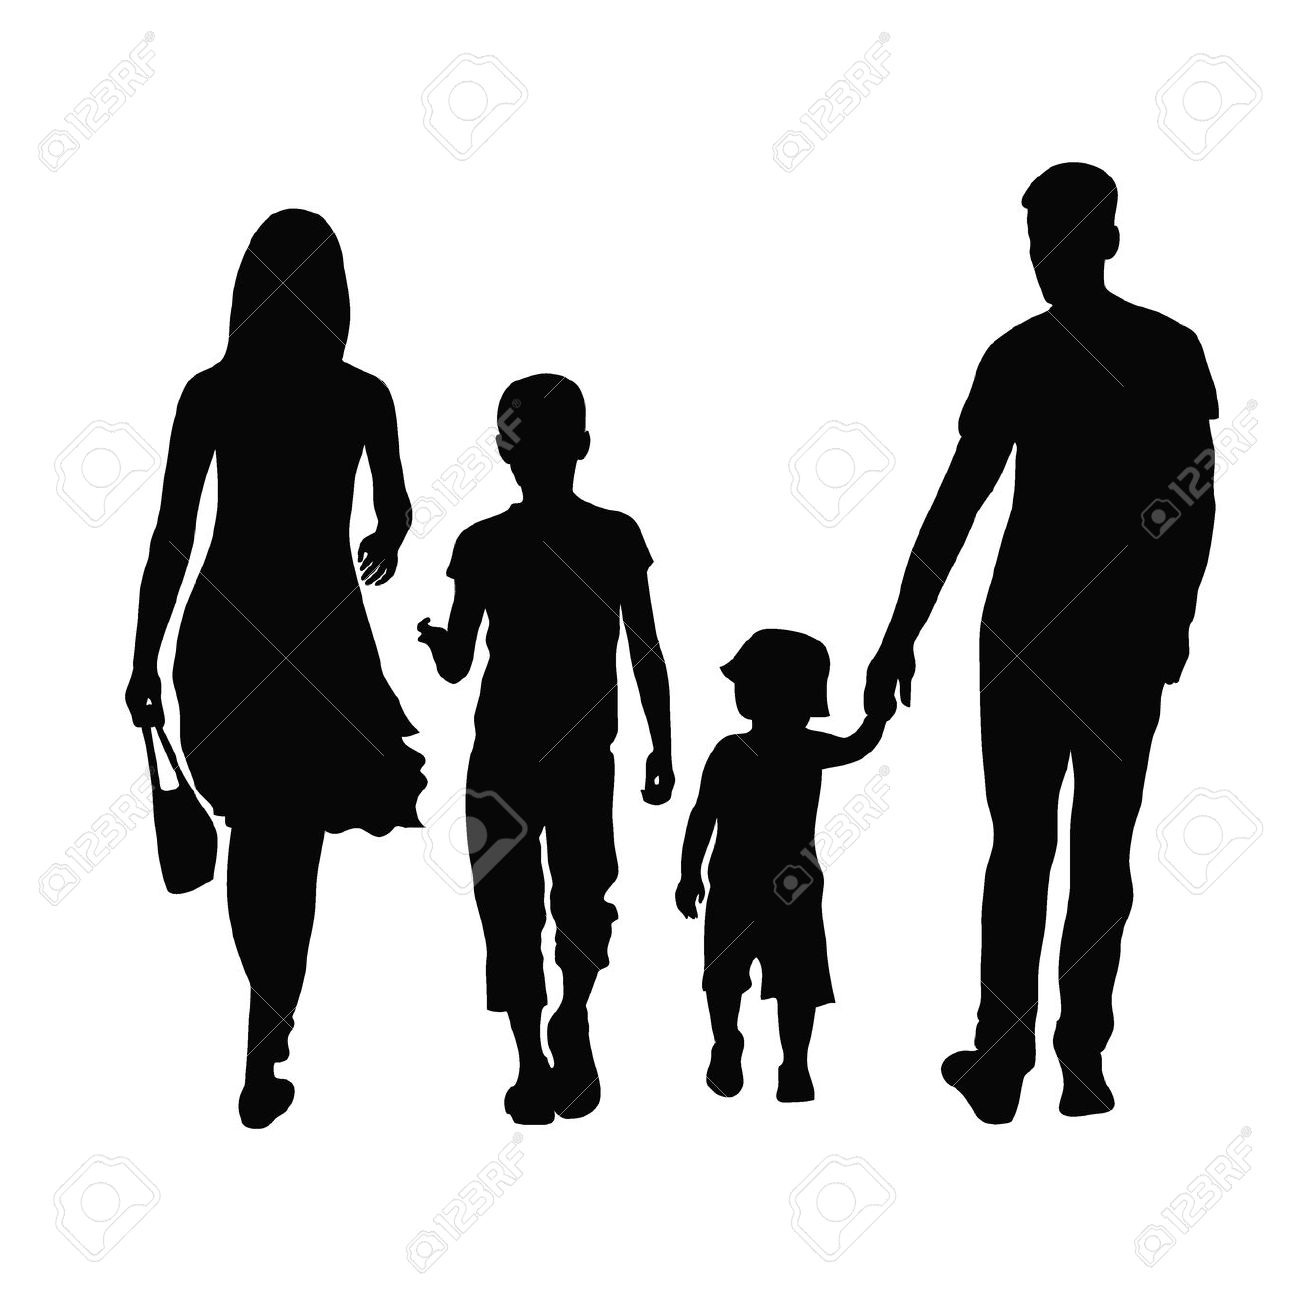 Download Family Of Five Silhouette at GetDrawings.com | Free for ...